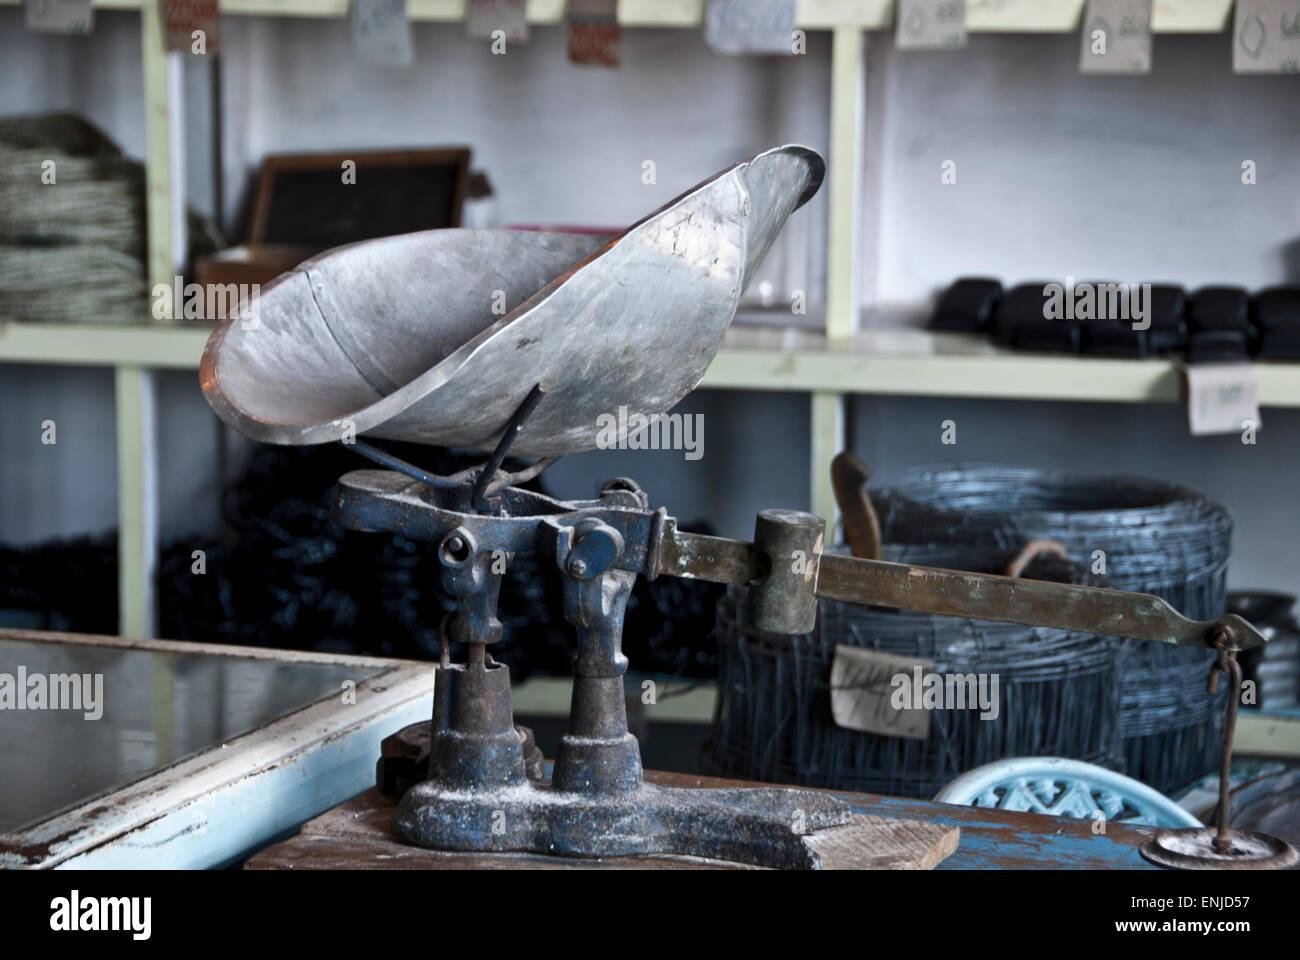 Old set of scales in a peso or ration shop in Remedios, Cuba Stock Photo